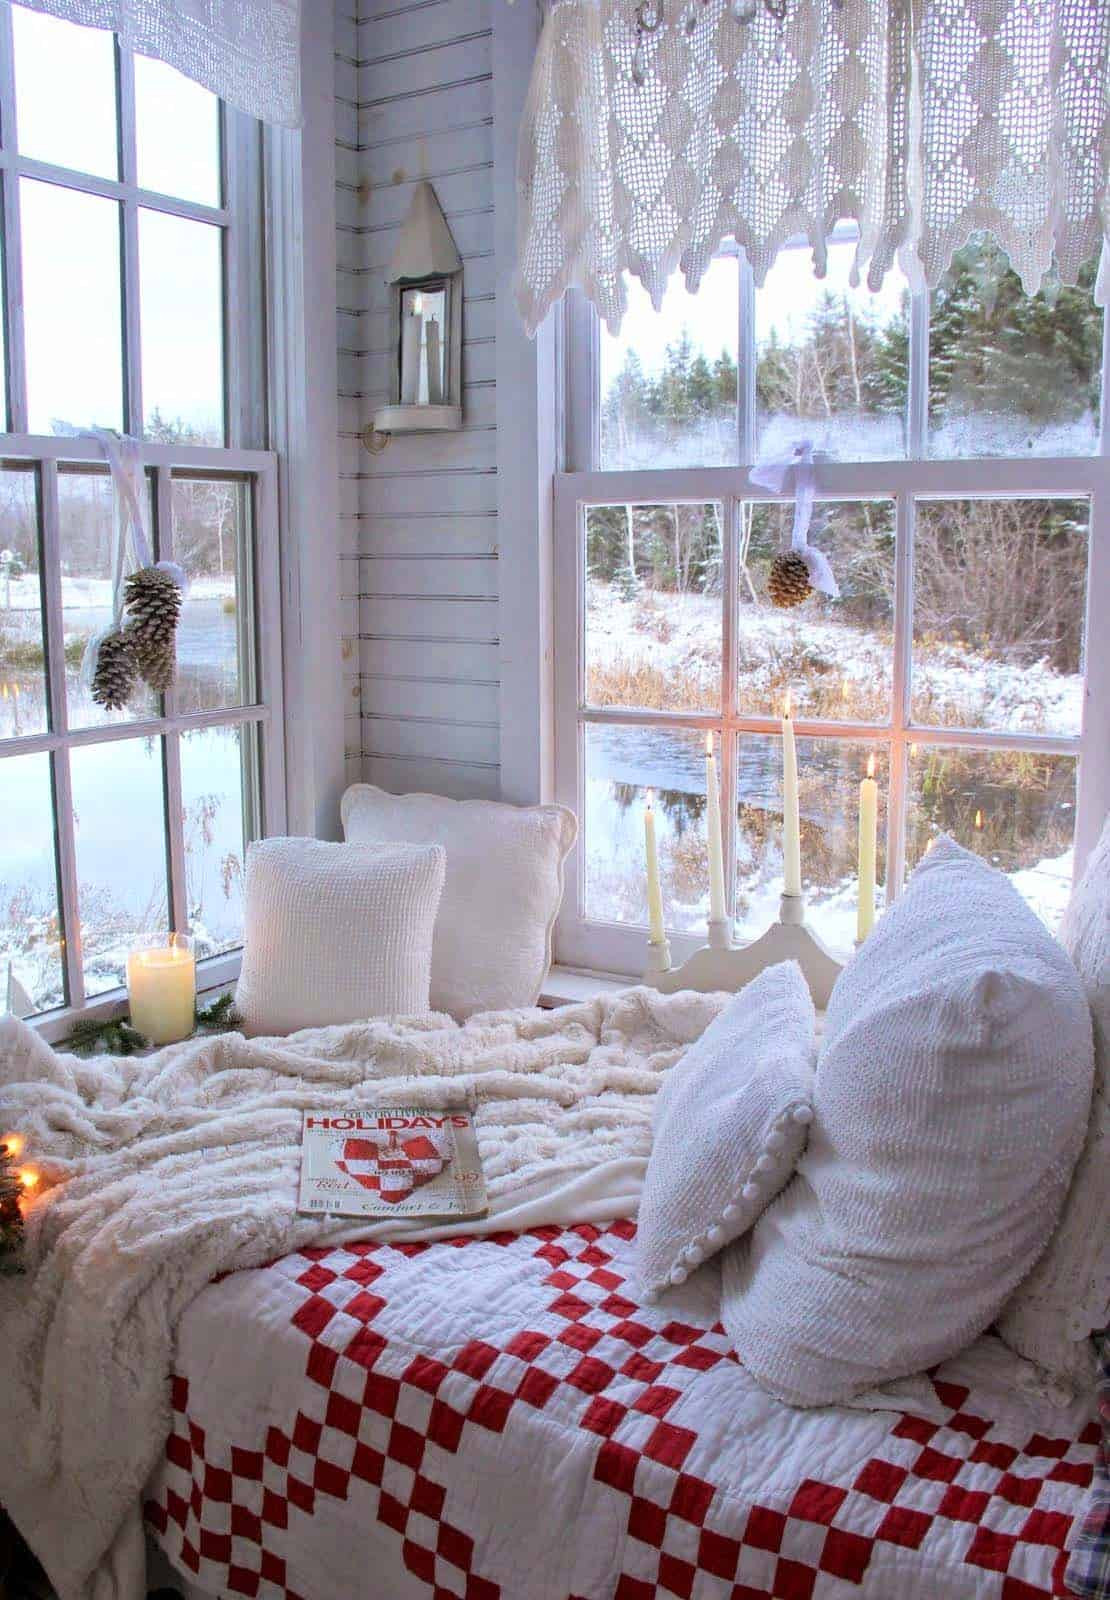 Christmas Bedroom Decoration
 35 Ways to create a Christmas wonderland in your bedroom